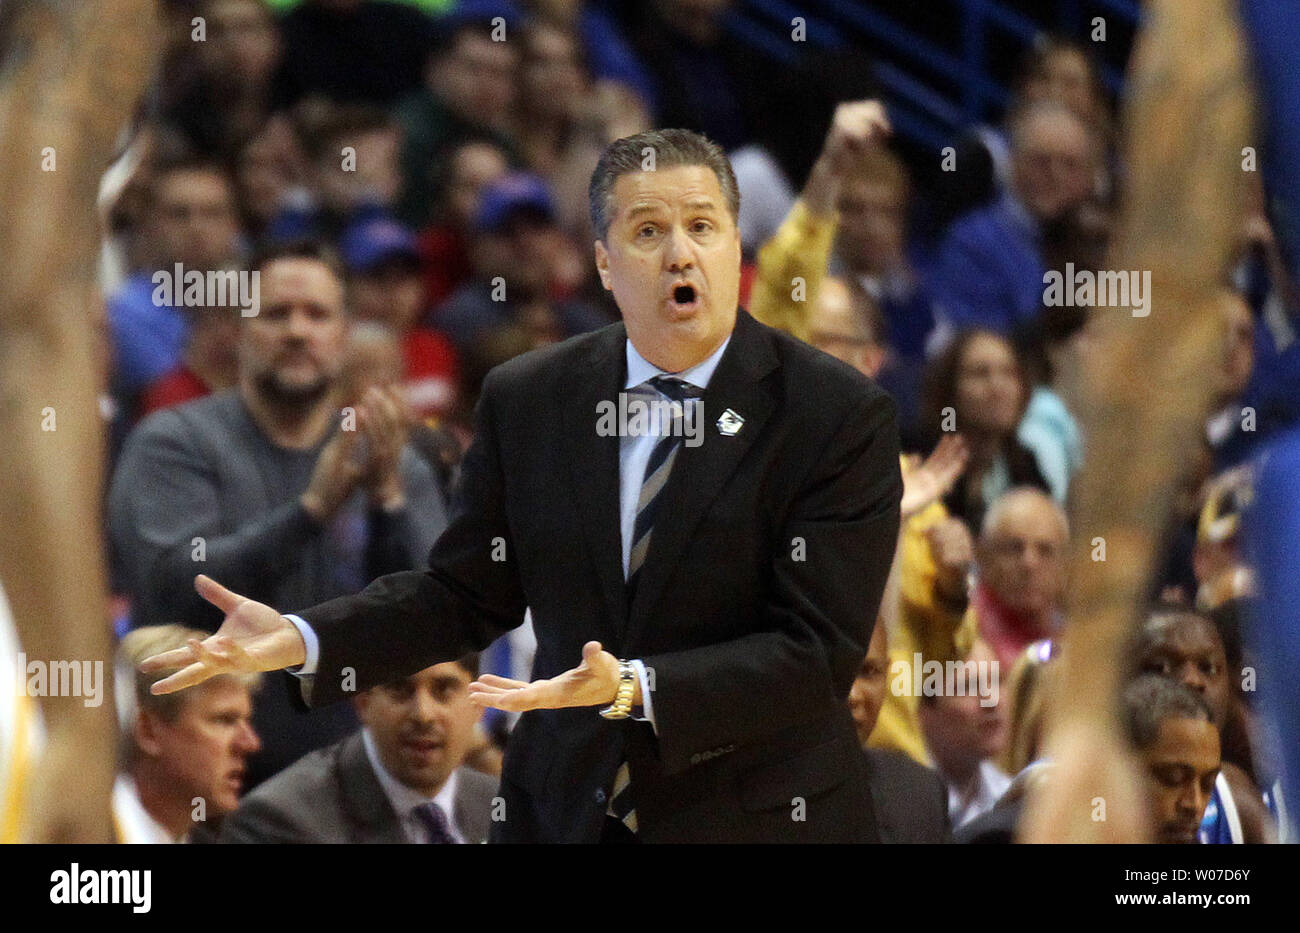 Kentucky Wildcats head basketball coach John Calipari gives his players instruction during the second half against the Wichita State Shockers in the NCAA Division 1 Men's Basketball Championship game at the Scottrade Center in St. Louis on March 23, 2014.  Kentucky won the game 78-76.   UPI/Bill Greenblatt Stock Photo